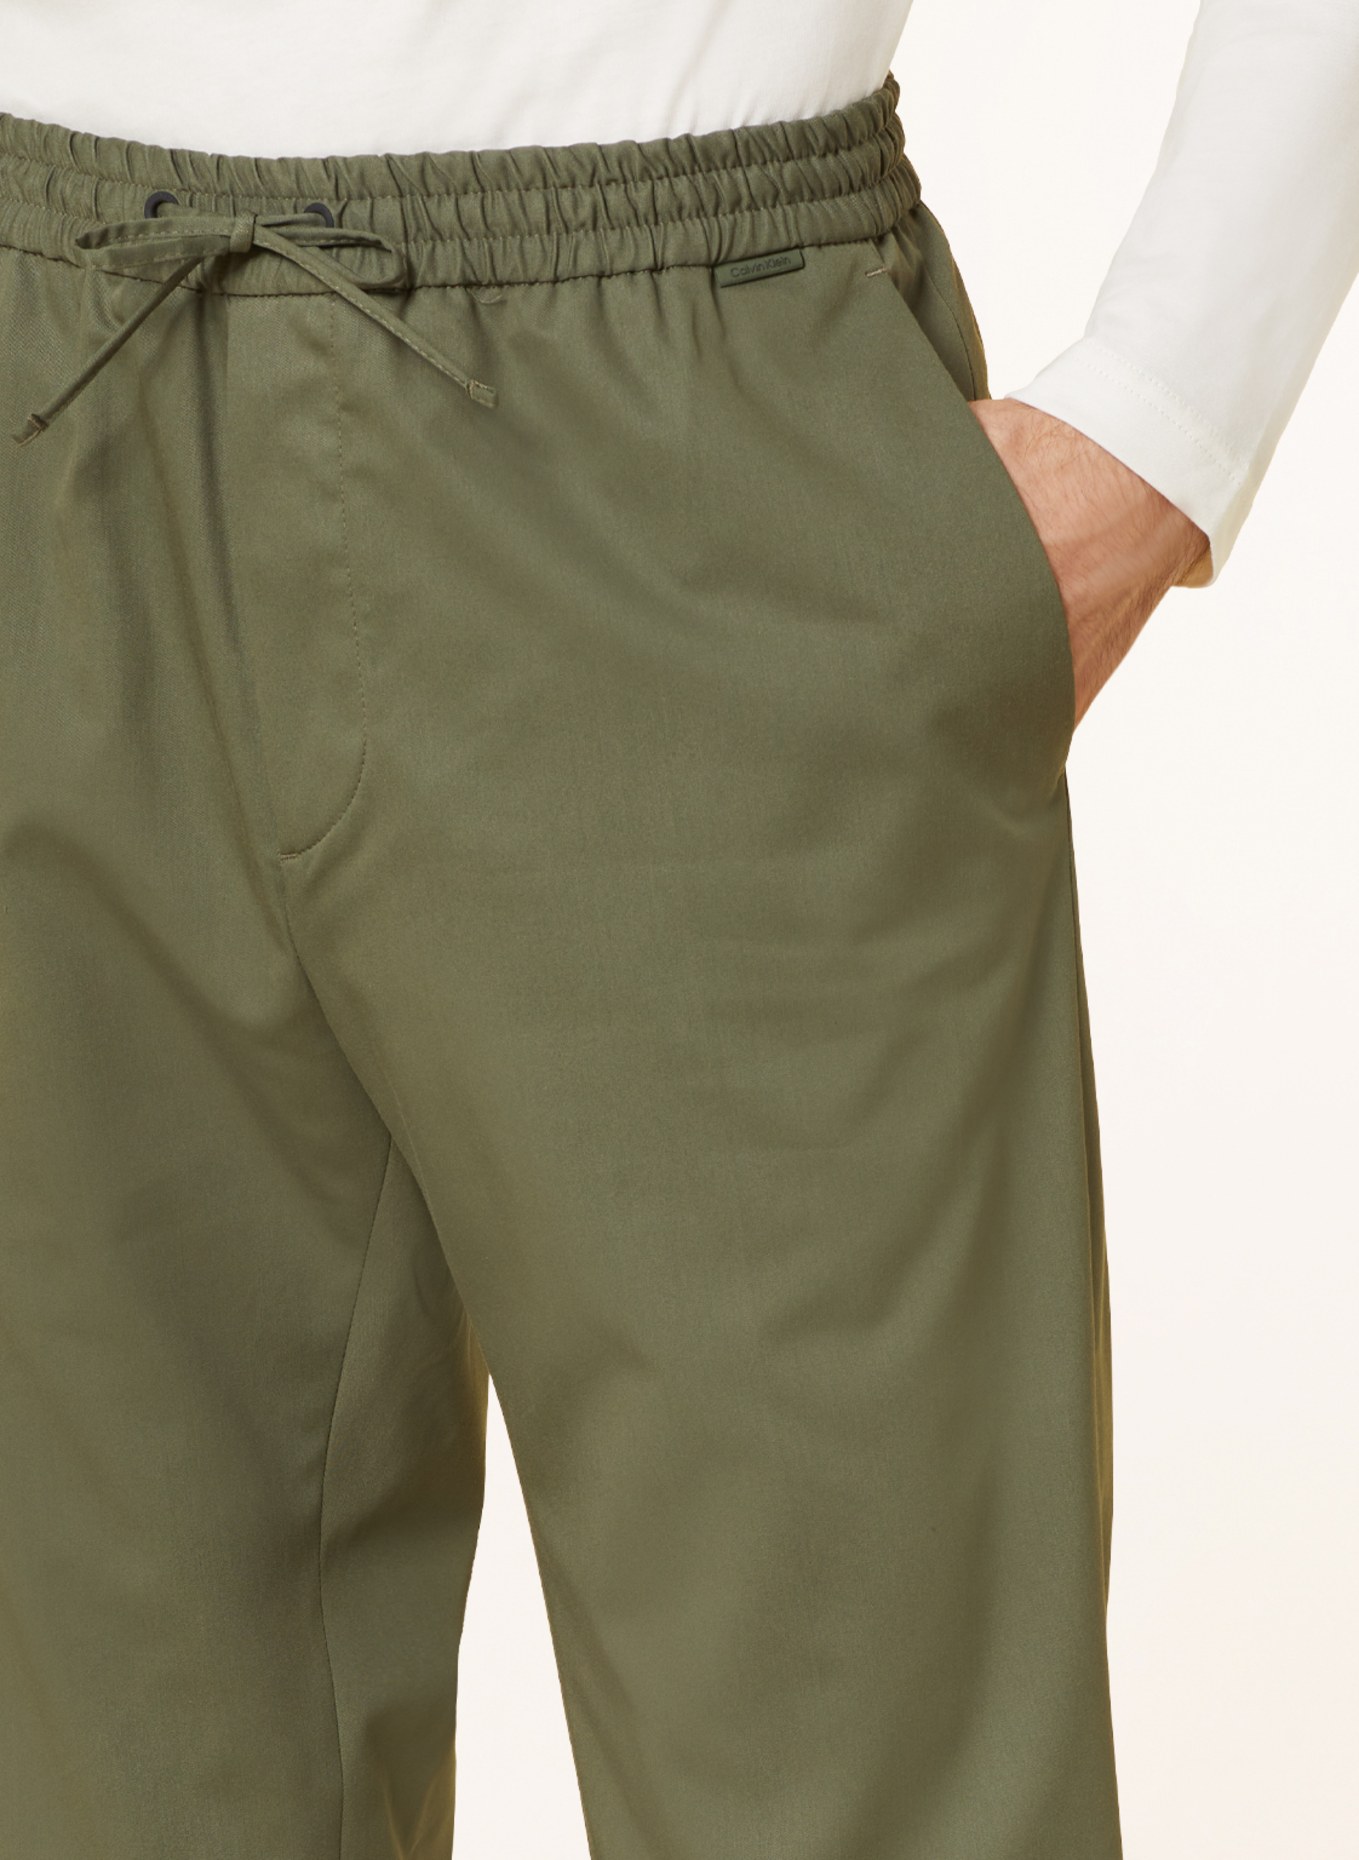 Calvin Klein Pants in jogger style, Color: DARK GREEN (Image 5)